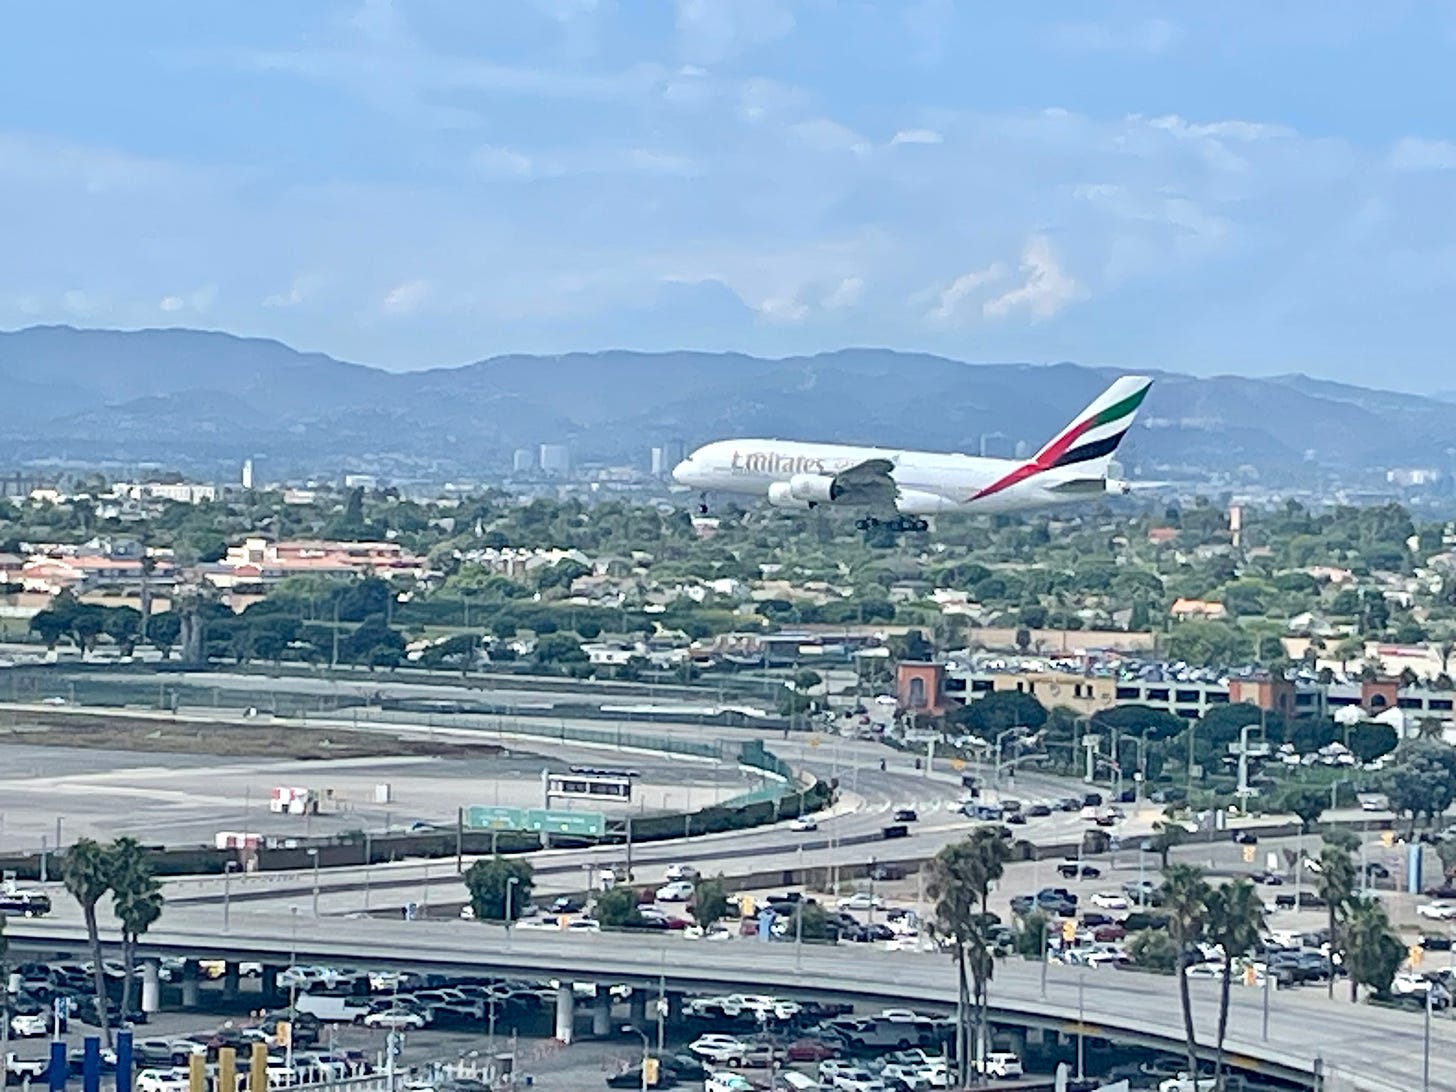 An Emirates A380 viewed from the roof of the H Hotel at LAX during Dorkfest.